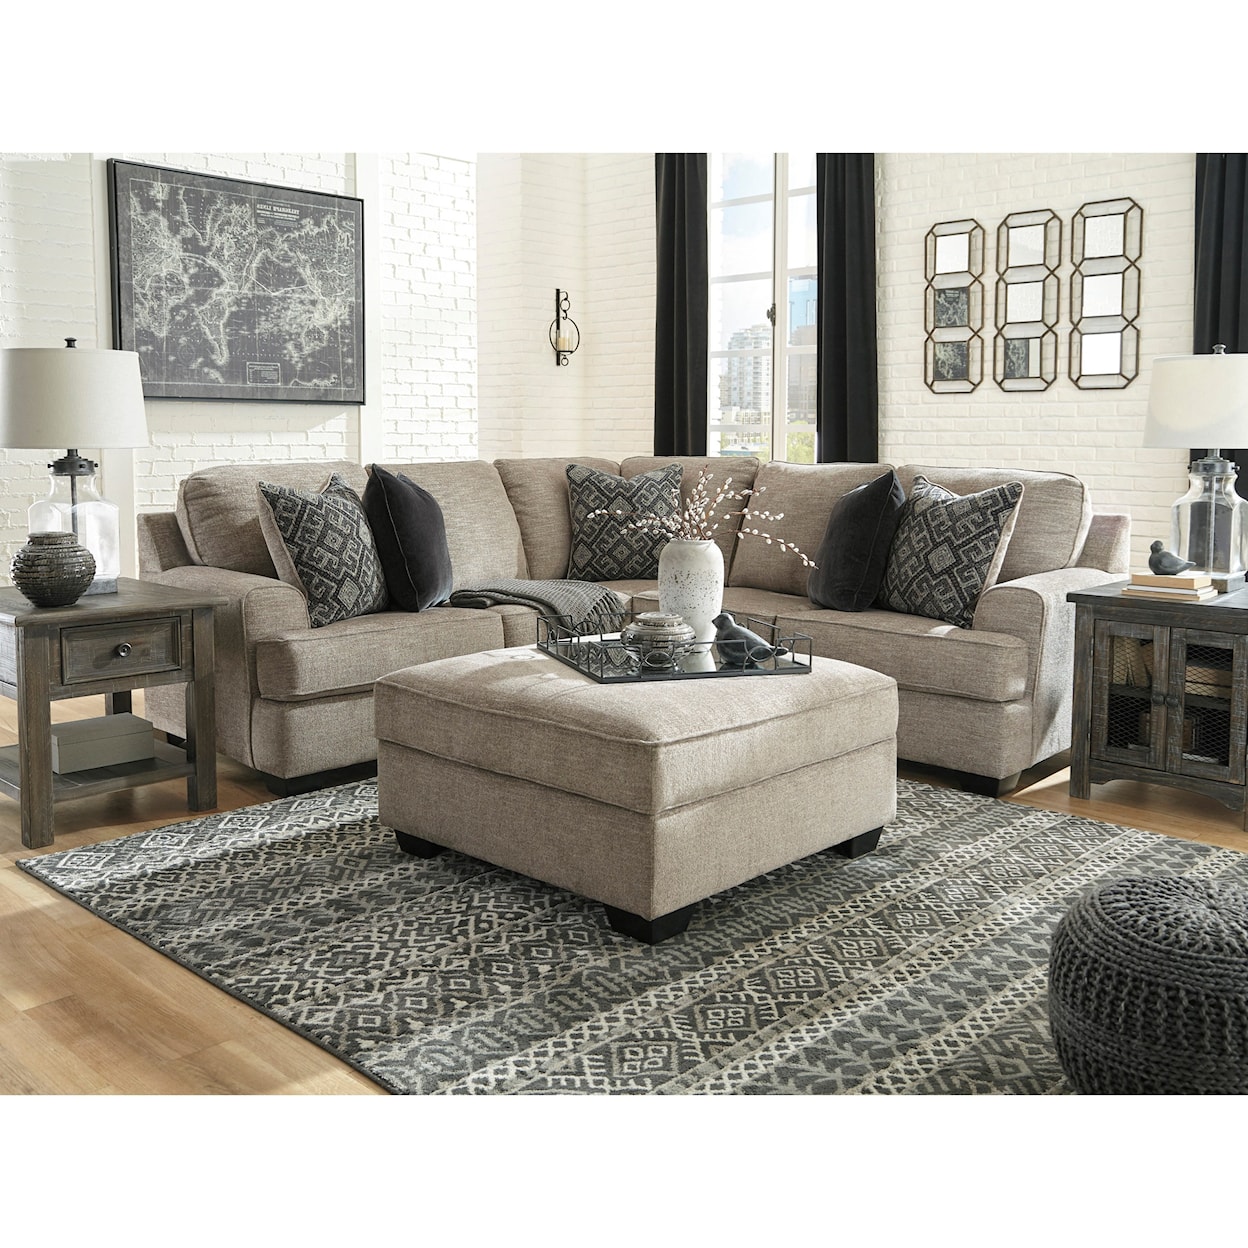 Signature Design by Ashley Bovarian 2-Piece Sectional